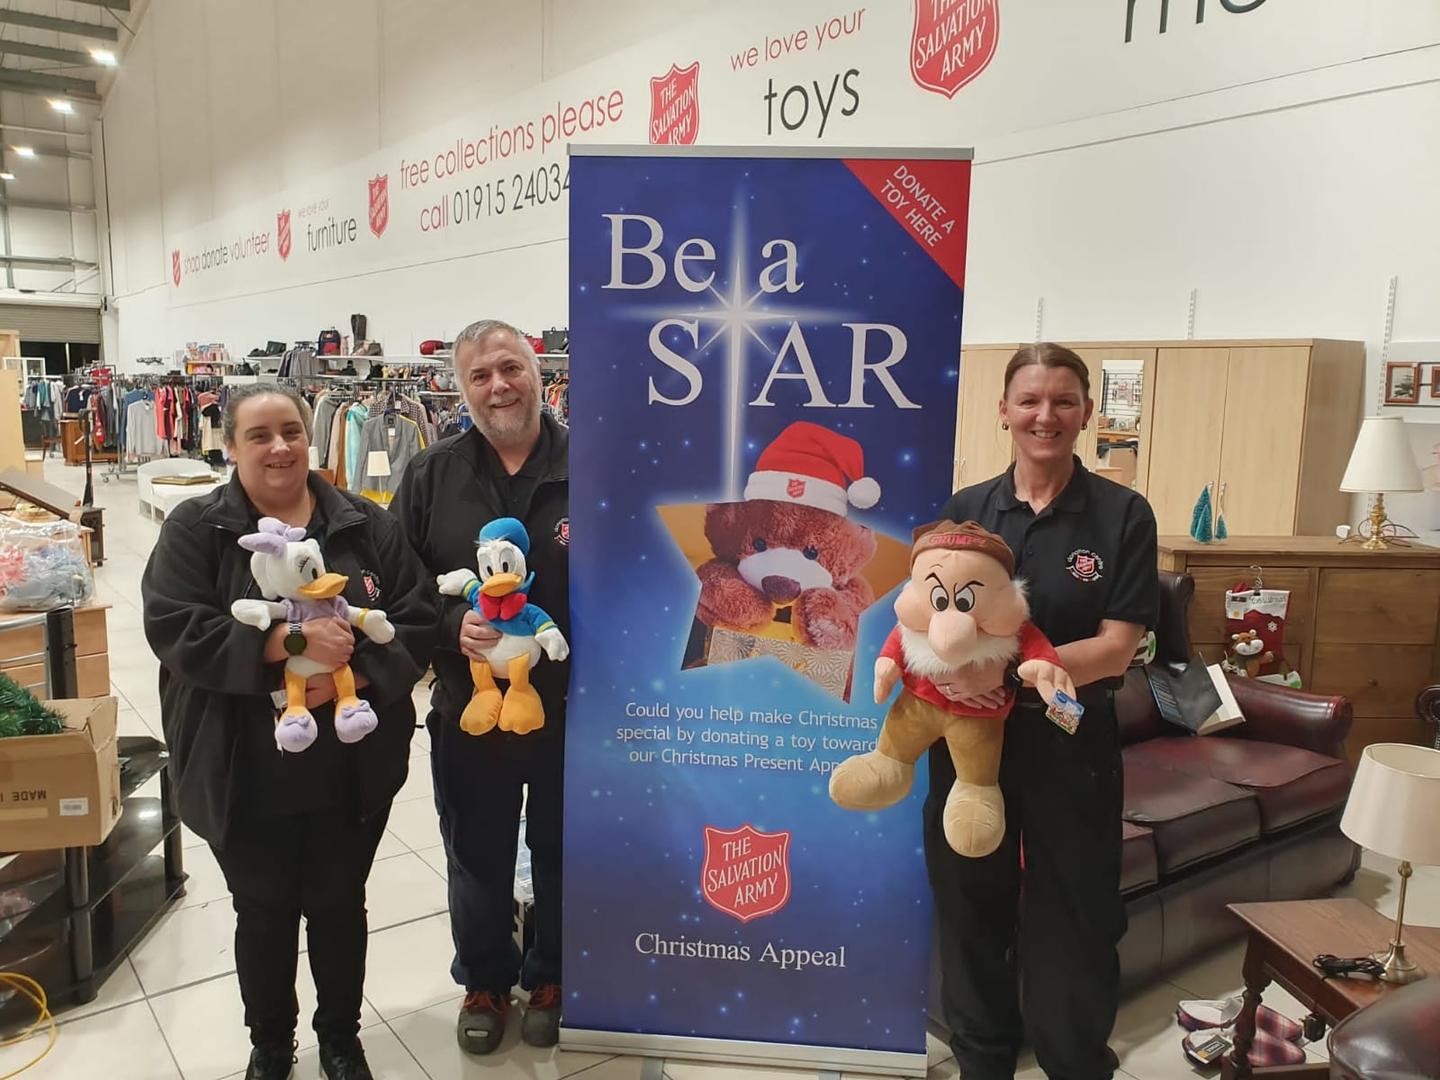 Three people in Salvation Army uniforms stand next to a 'Be a Star' campaign poster holding soft toys.